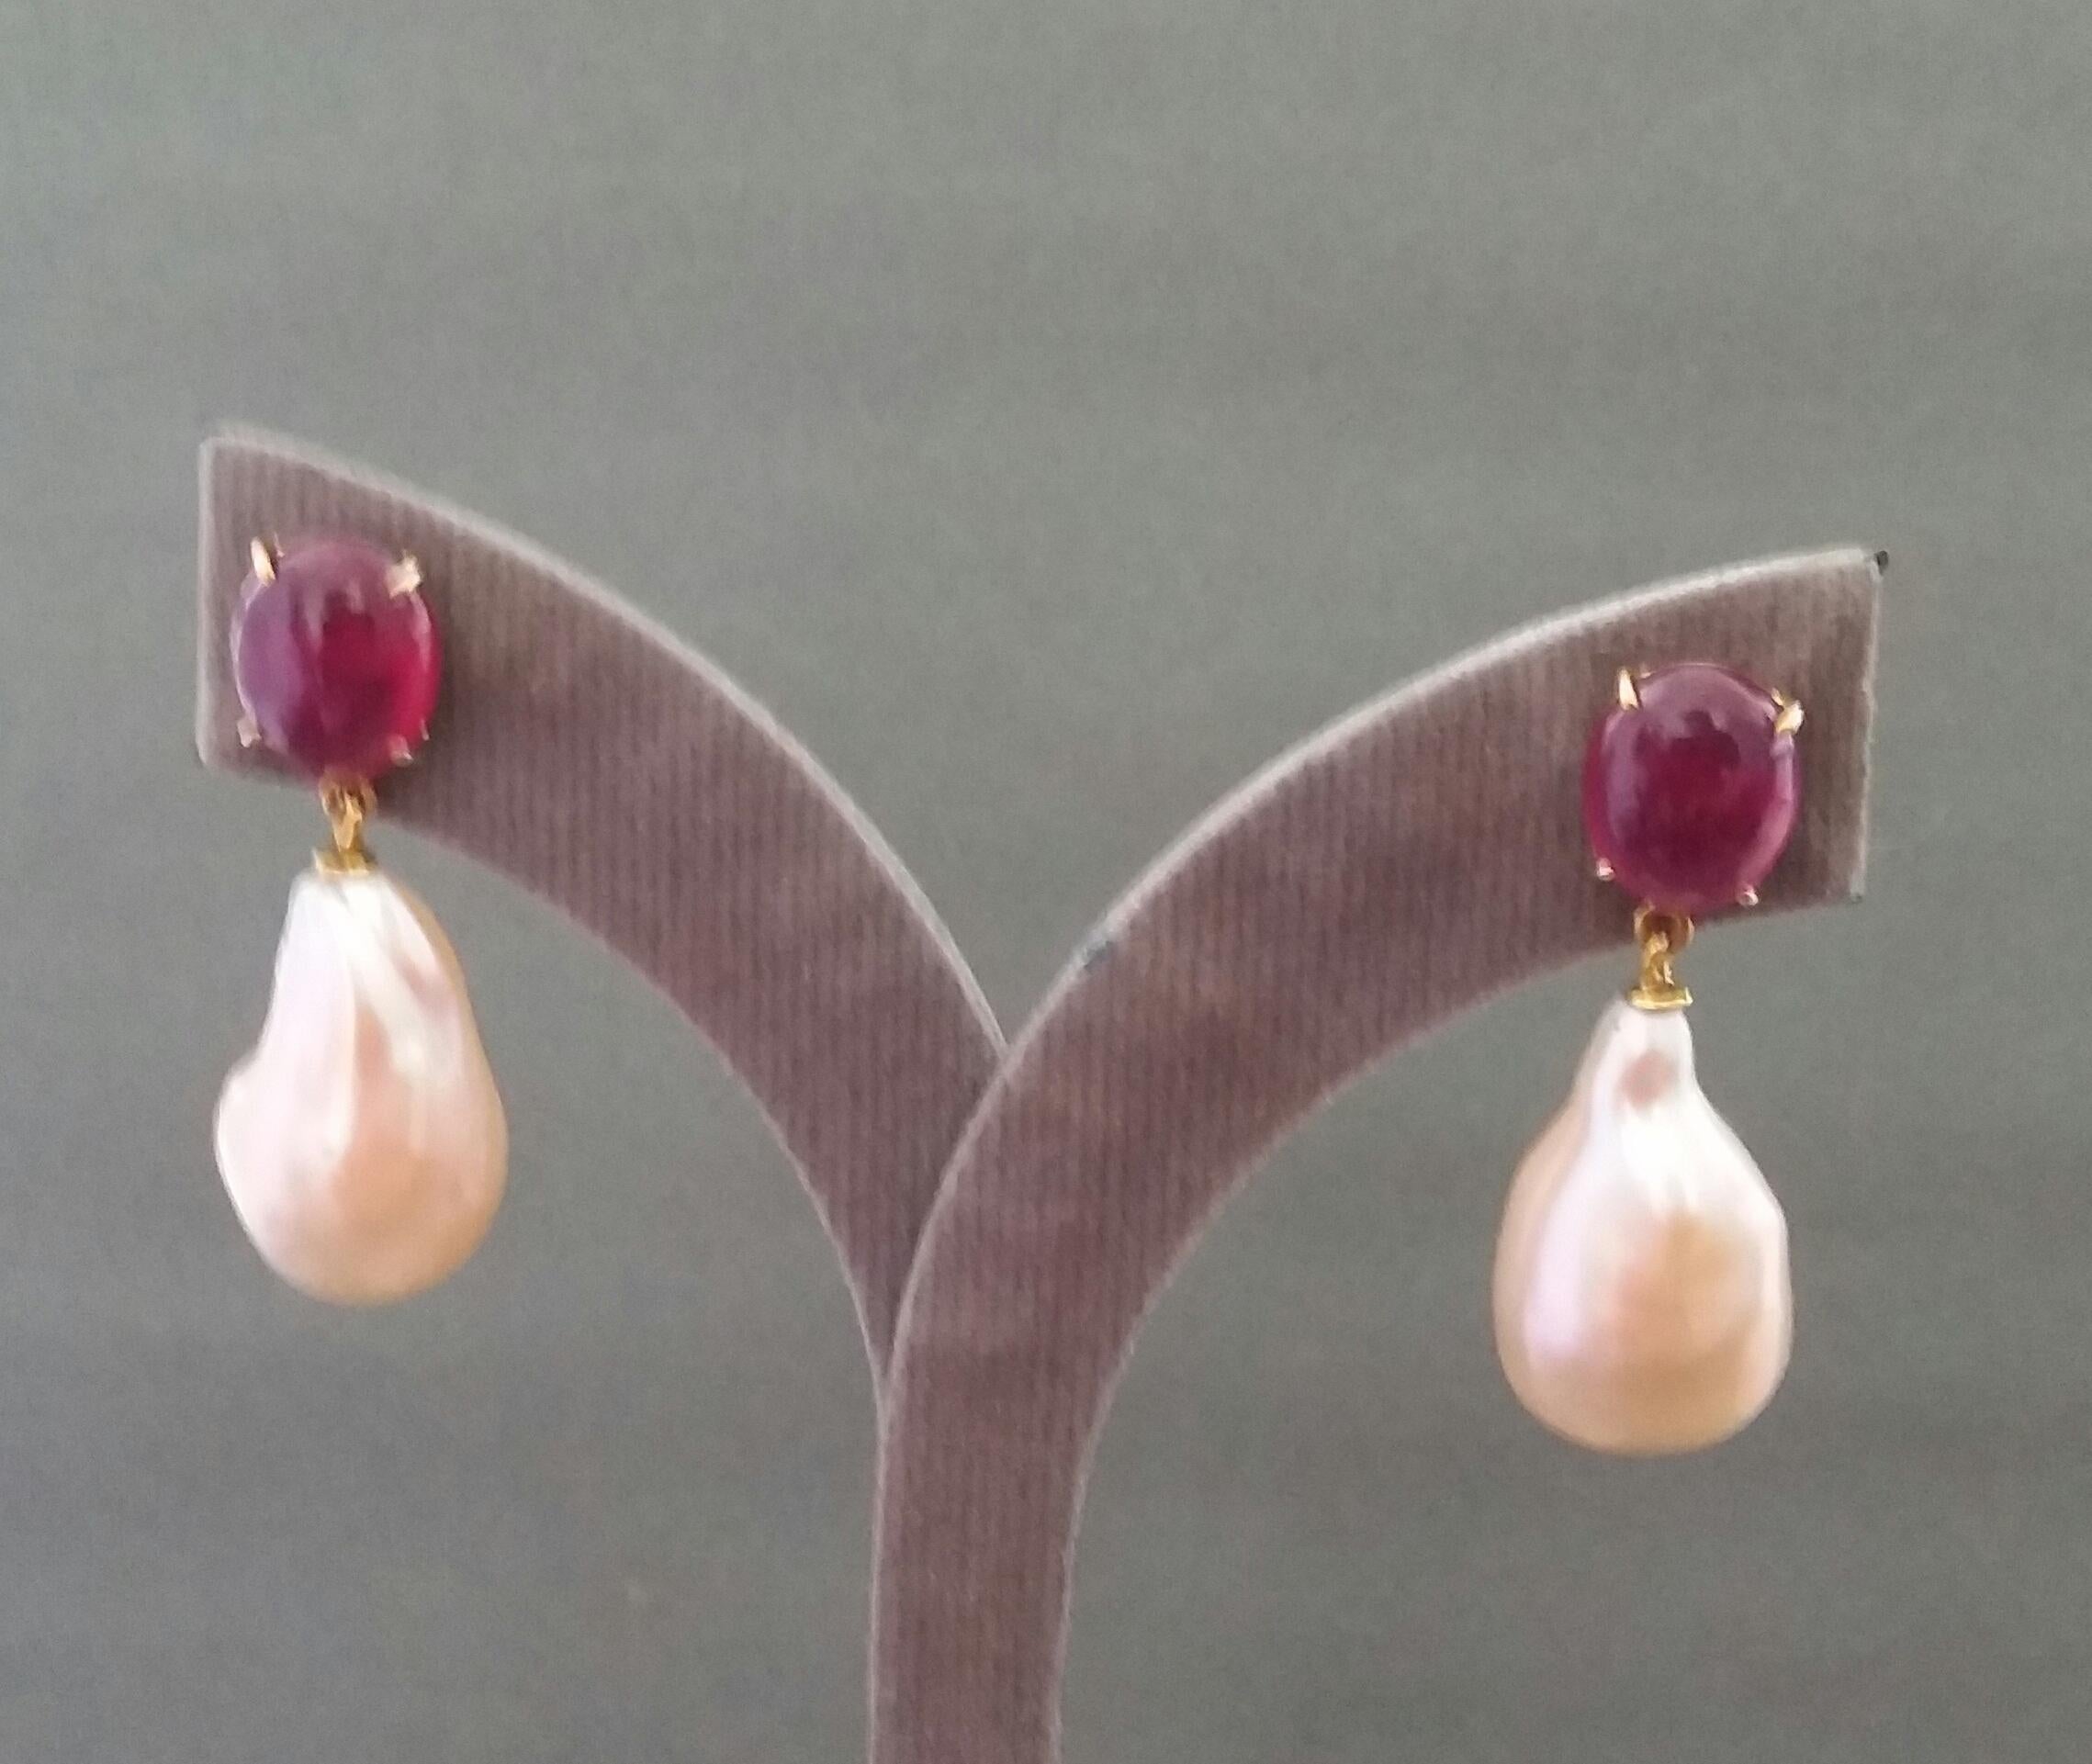 Big Size Pear Shape Cream Color Pearls Oval Ruby Cabochon 14 Karat Gold Earrings For Sale 1